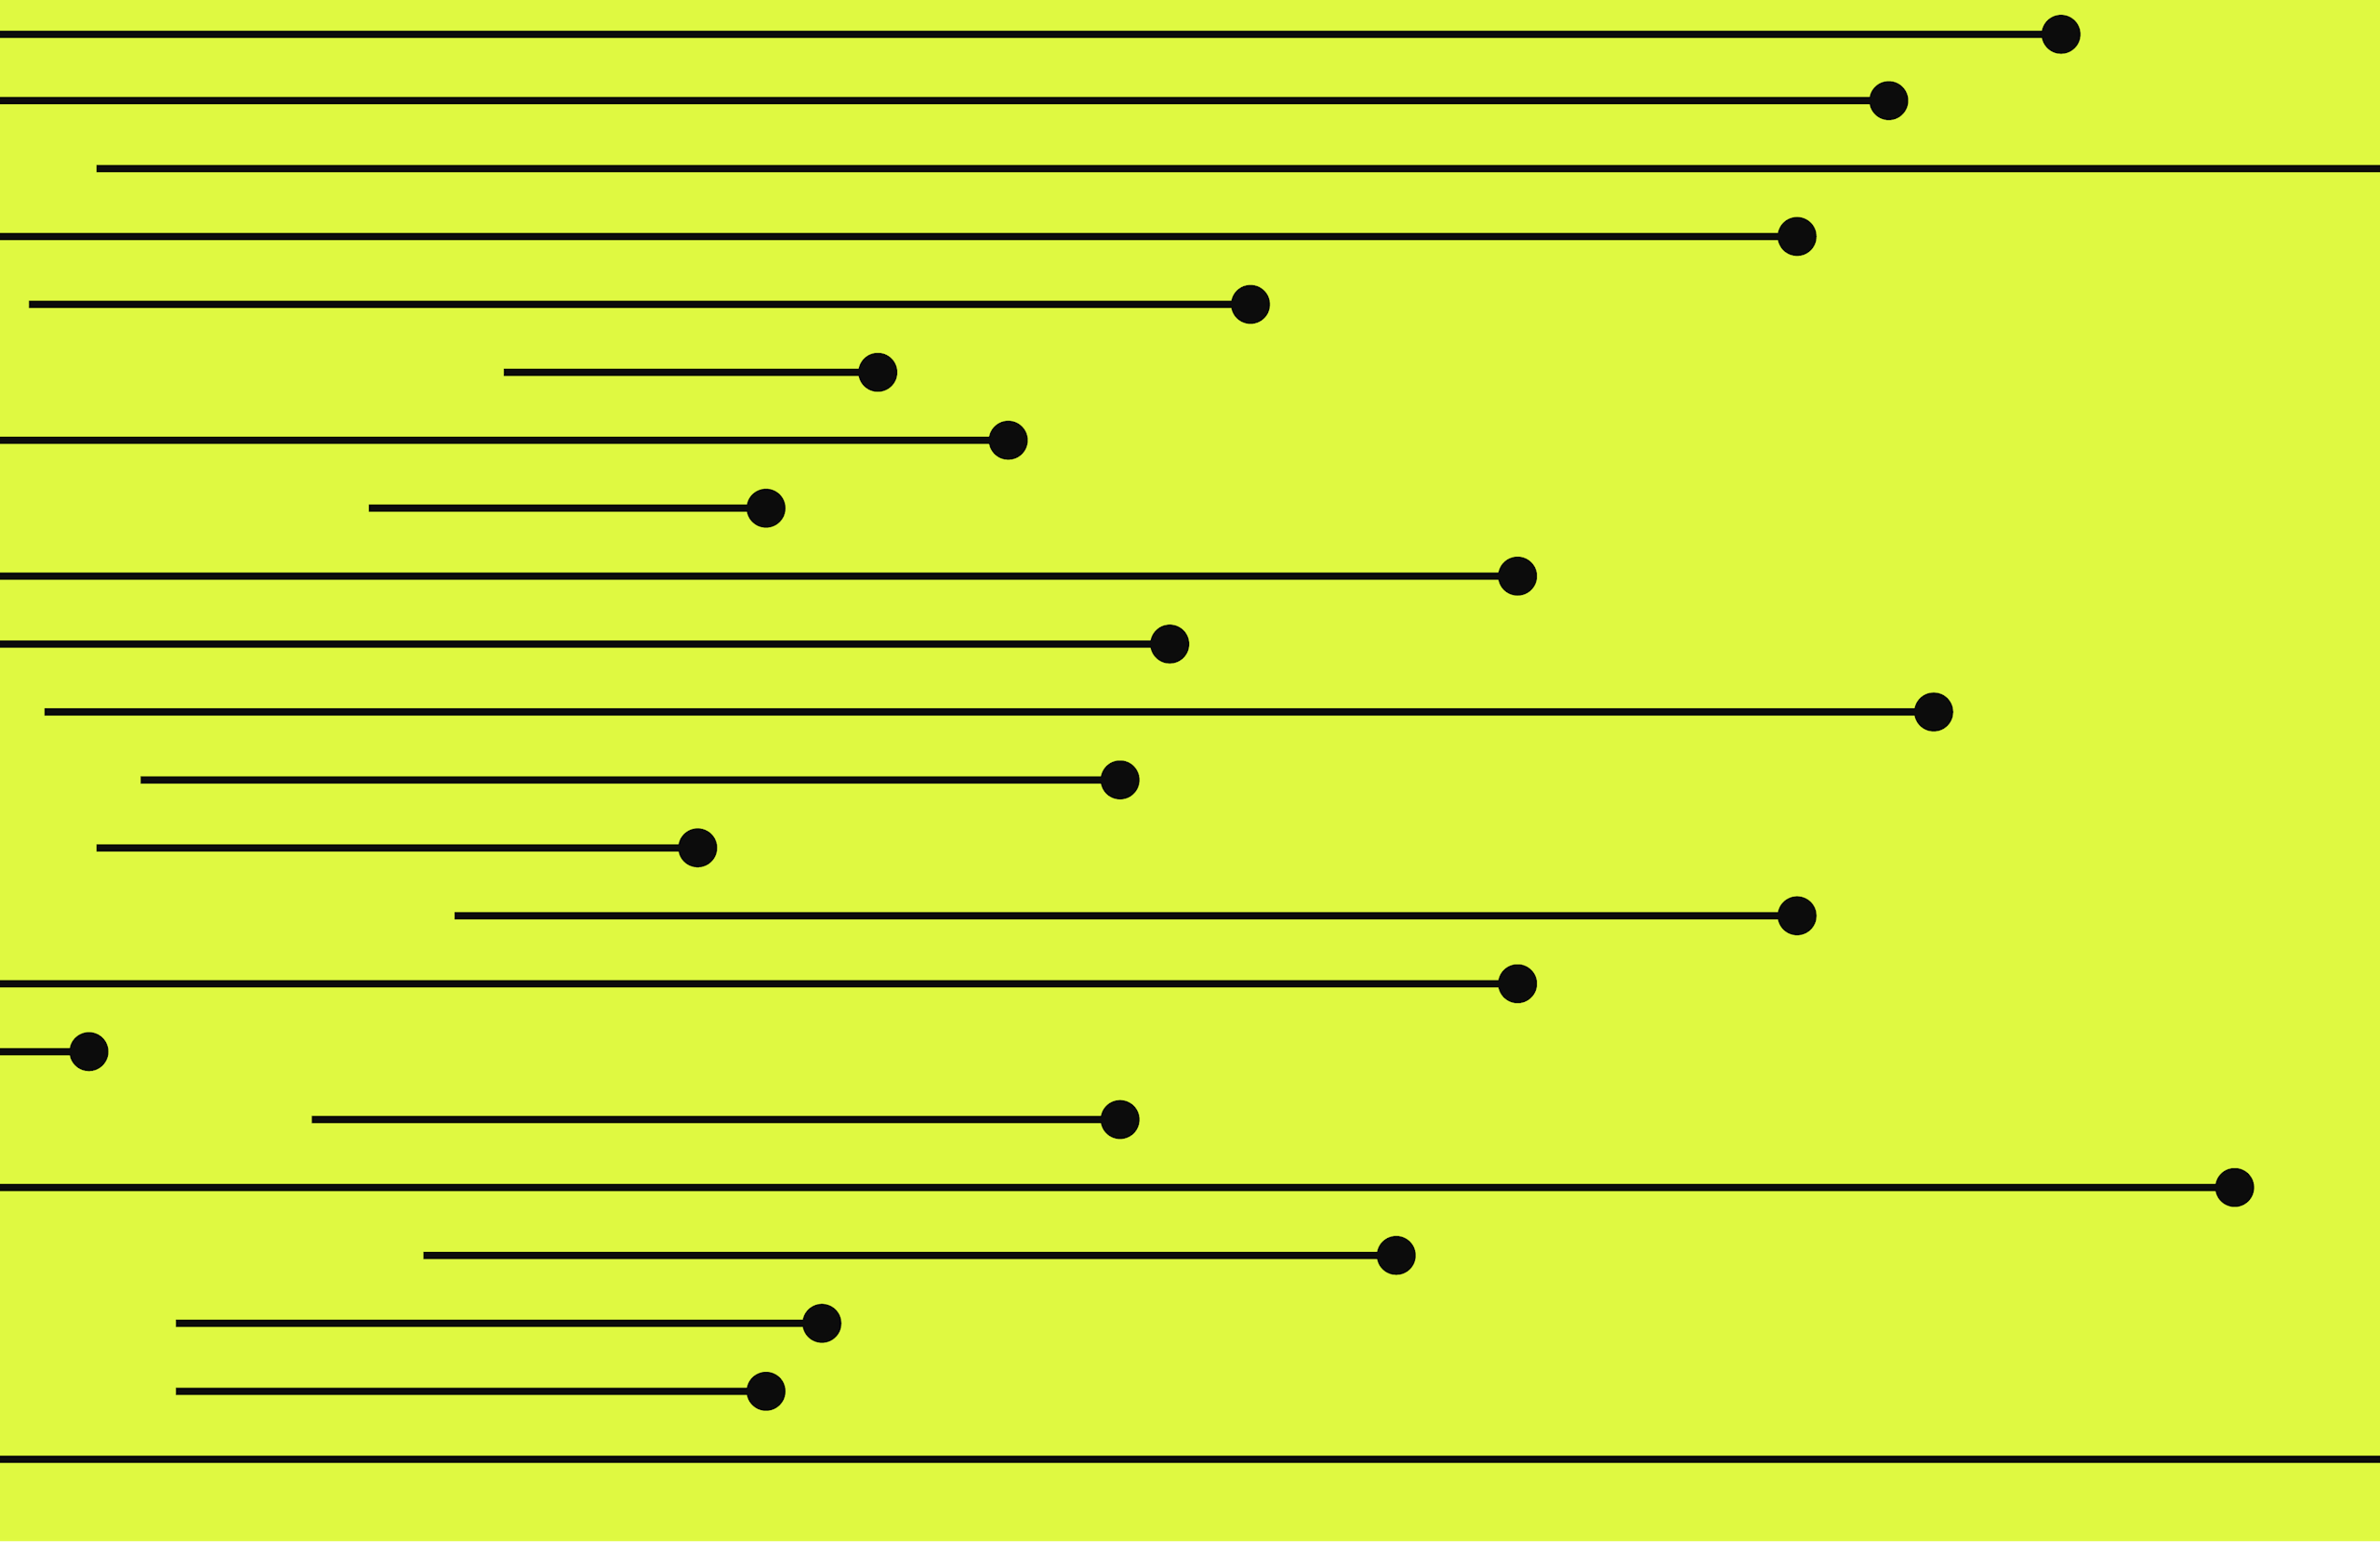 Image displays yellow background with black lines and dots. 